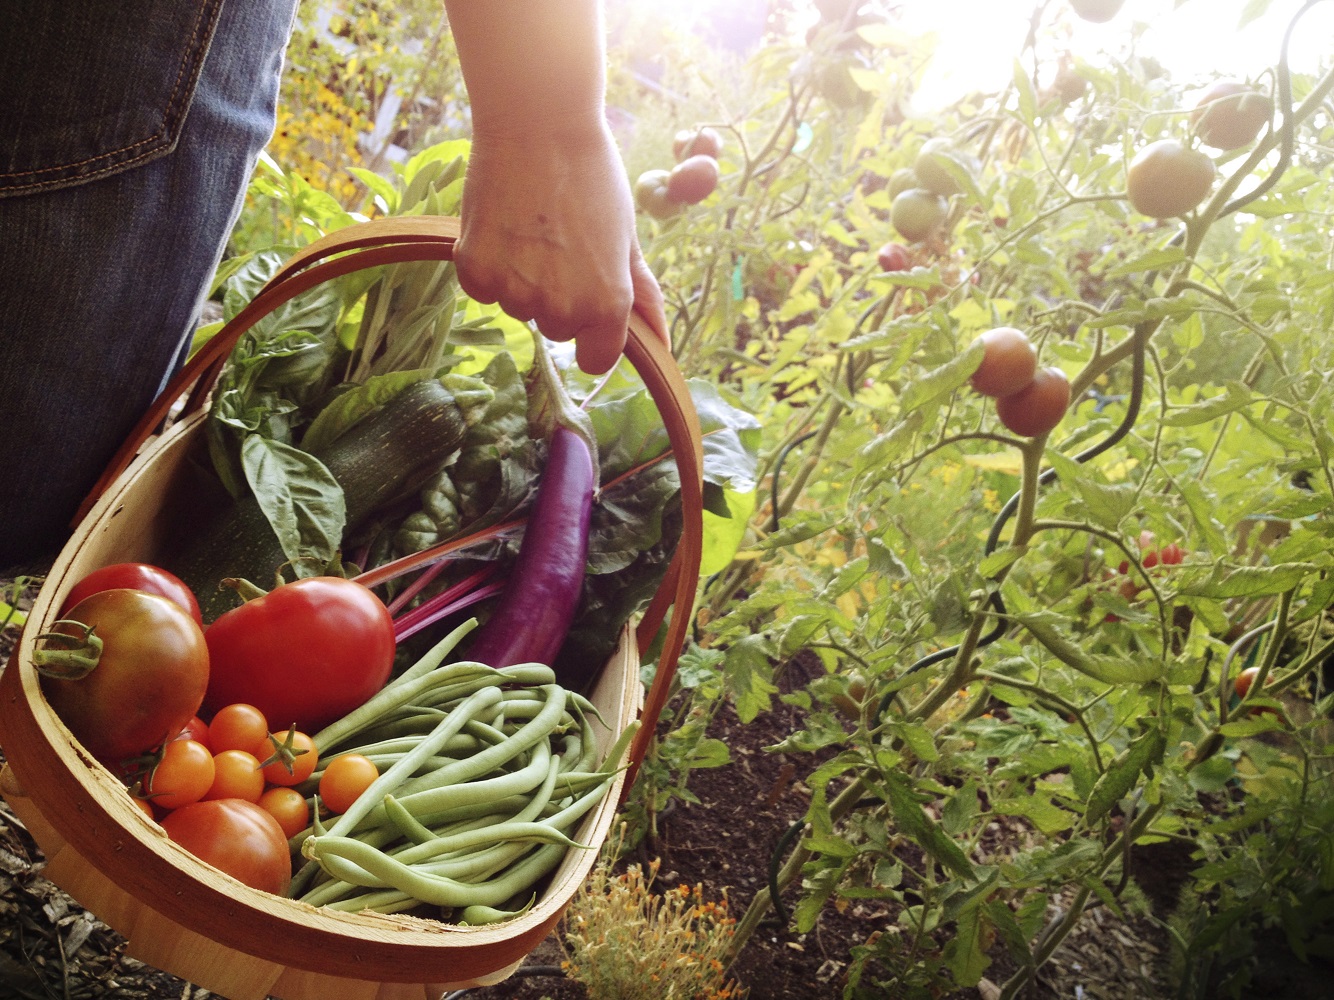 walking through a garden with a basket filled with fresh vegetables